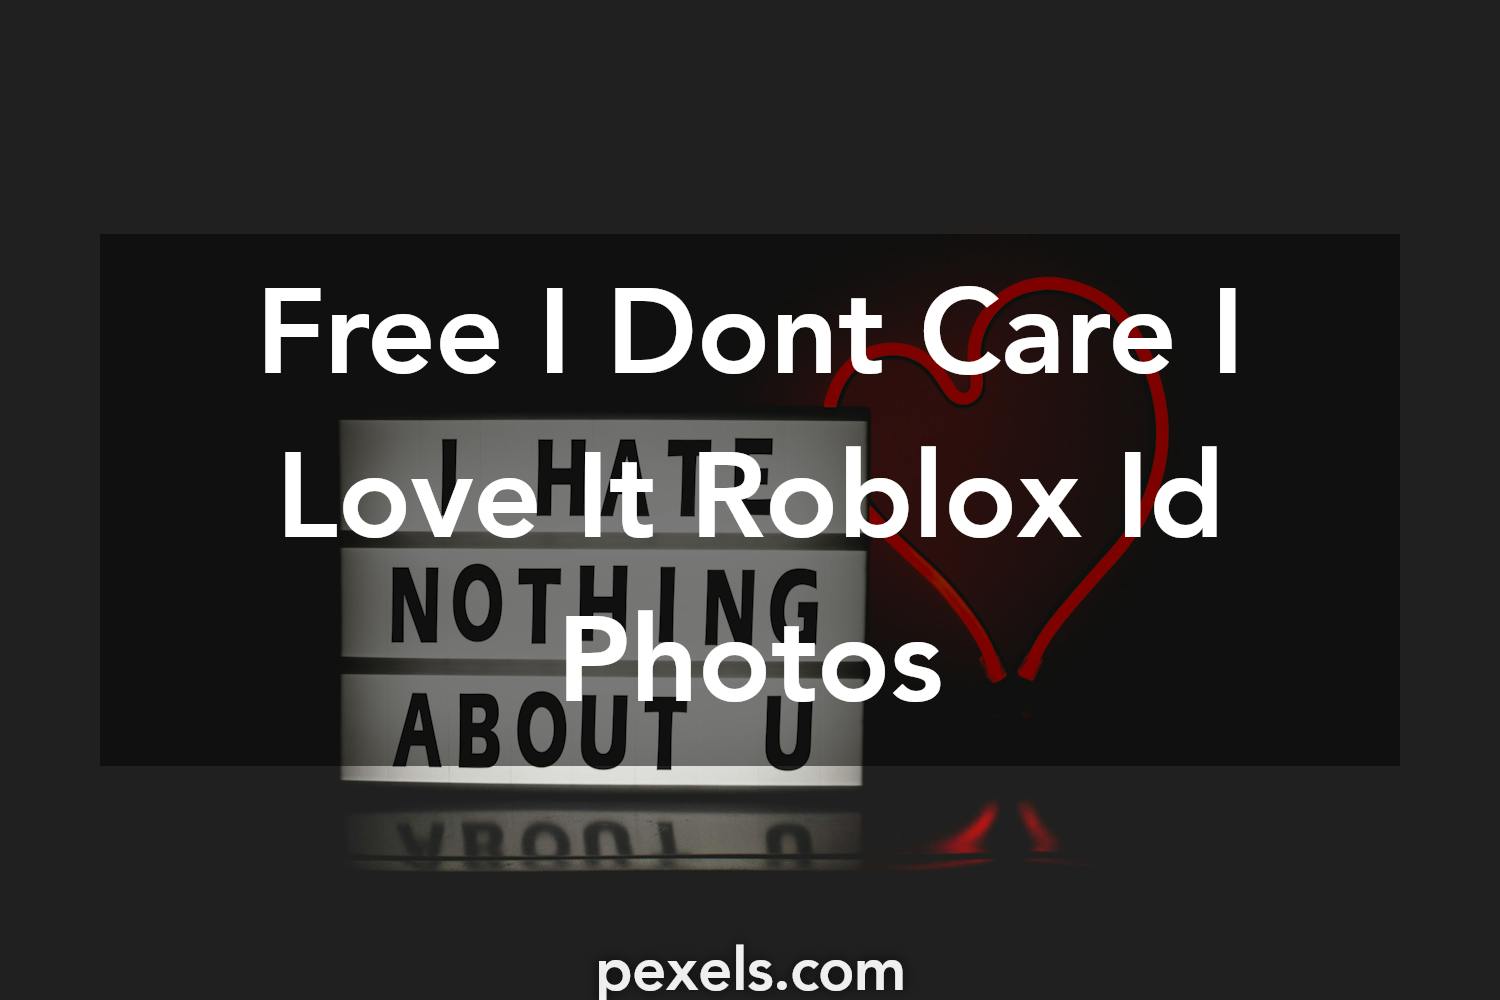 1000 Roblox Ids - f8 blooming plateau roblox game how to get free robux